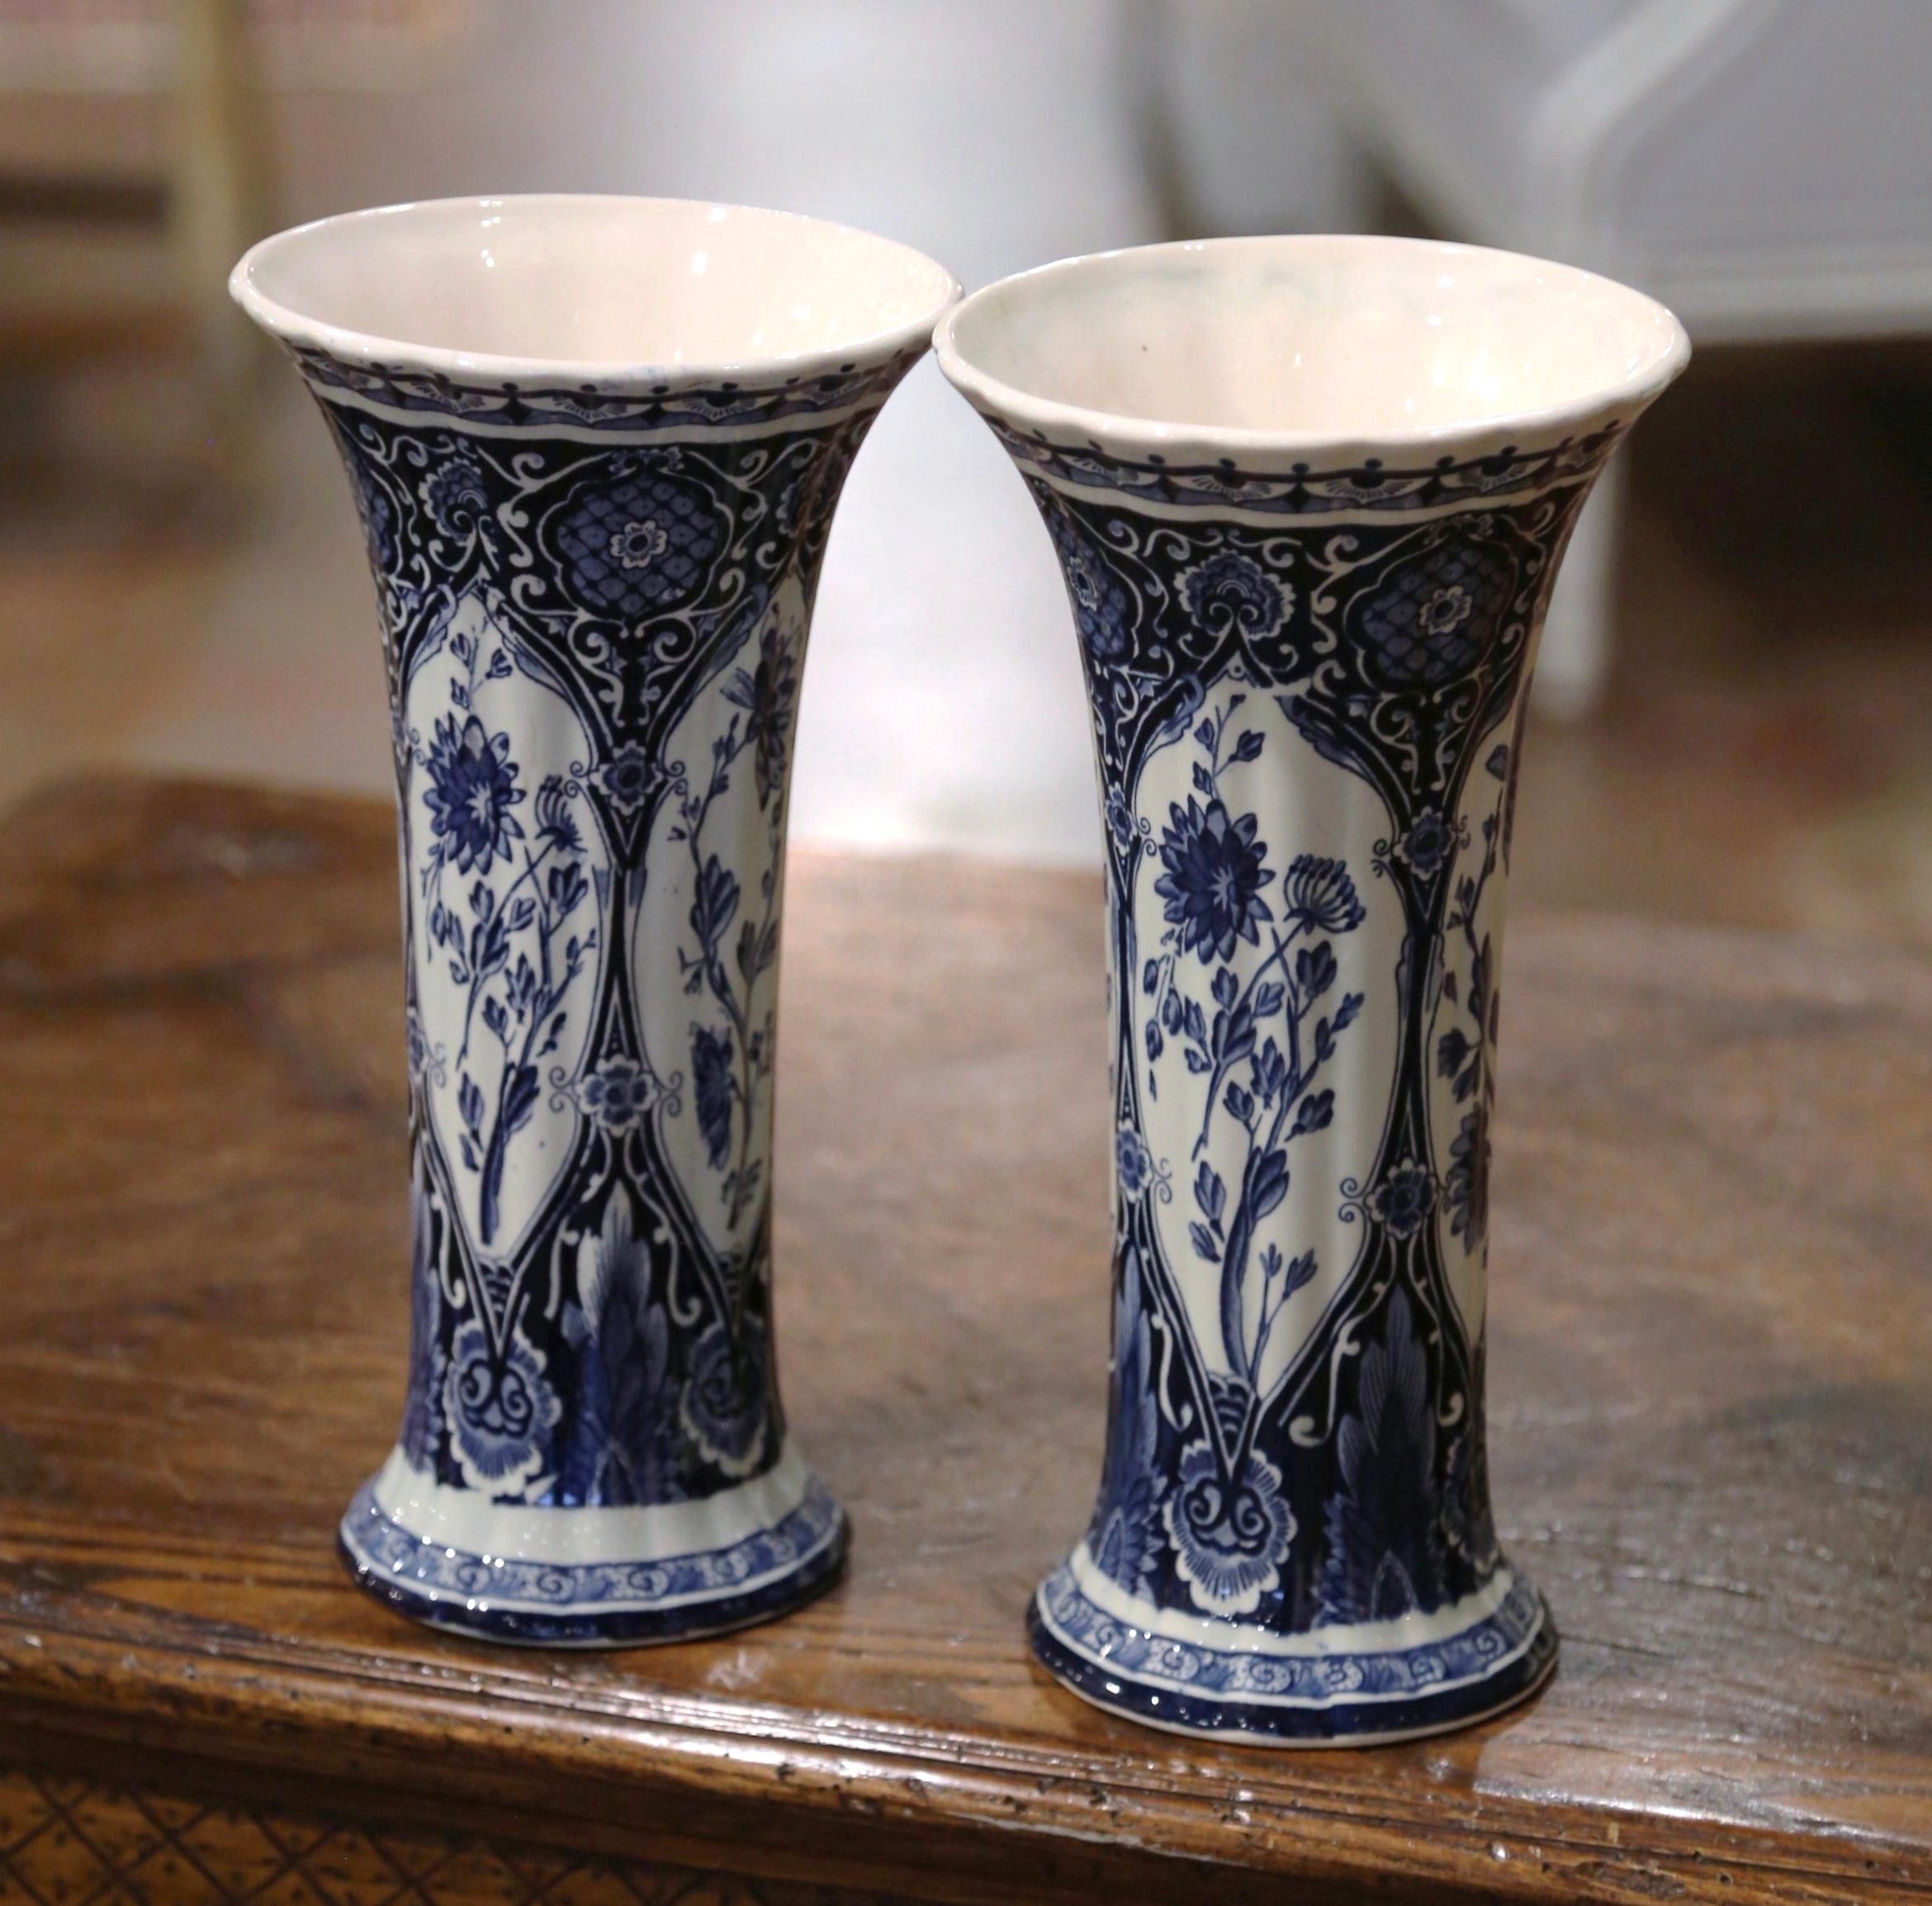 Decorate a shelf or console table with this elegant pair of antique Delft style vases. Crafted in Netherlands circa 1920, the hand-painted trumpet vases are round in shape over a long, elegant, fluted neck. Each vintage vessel is painted in the blue